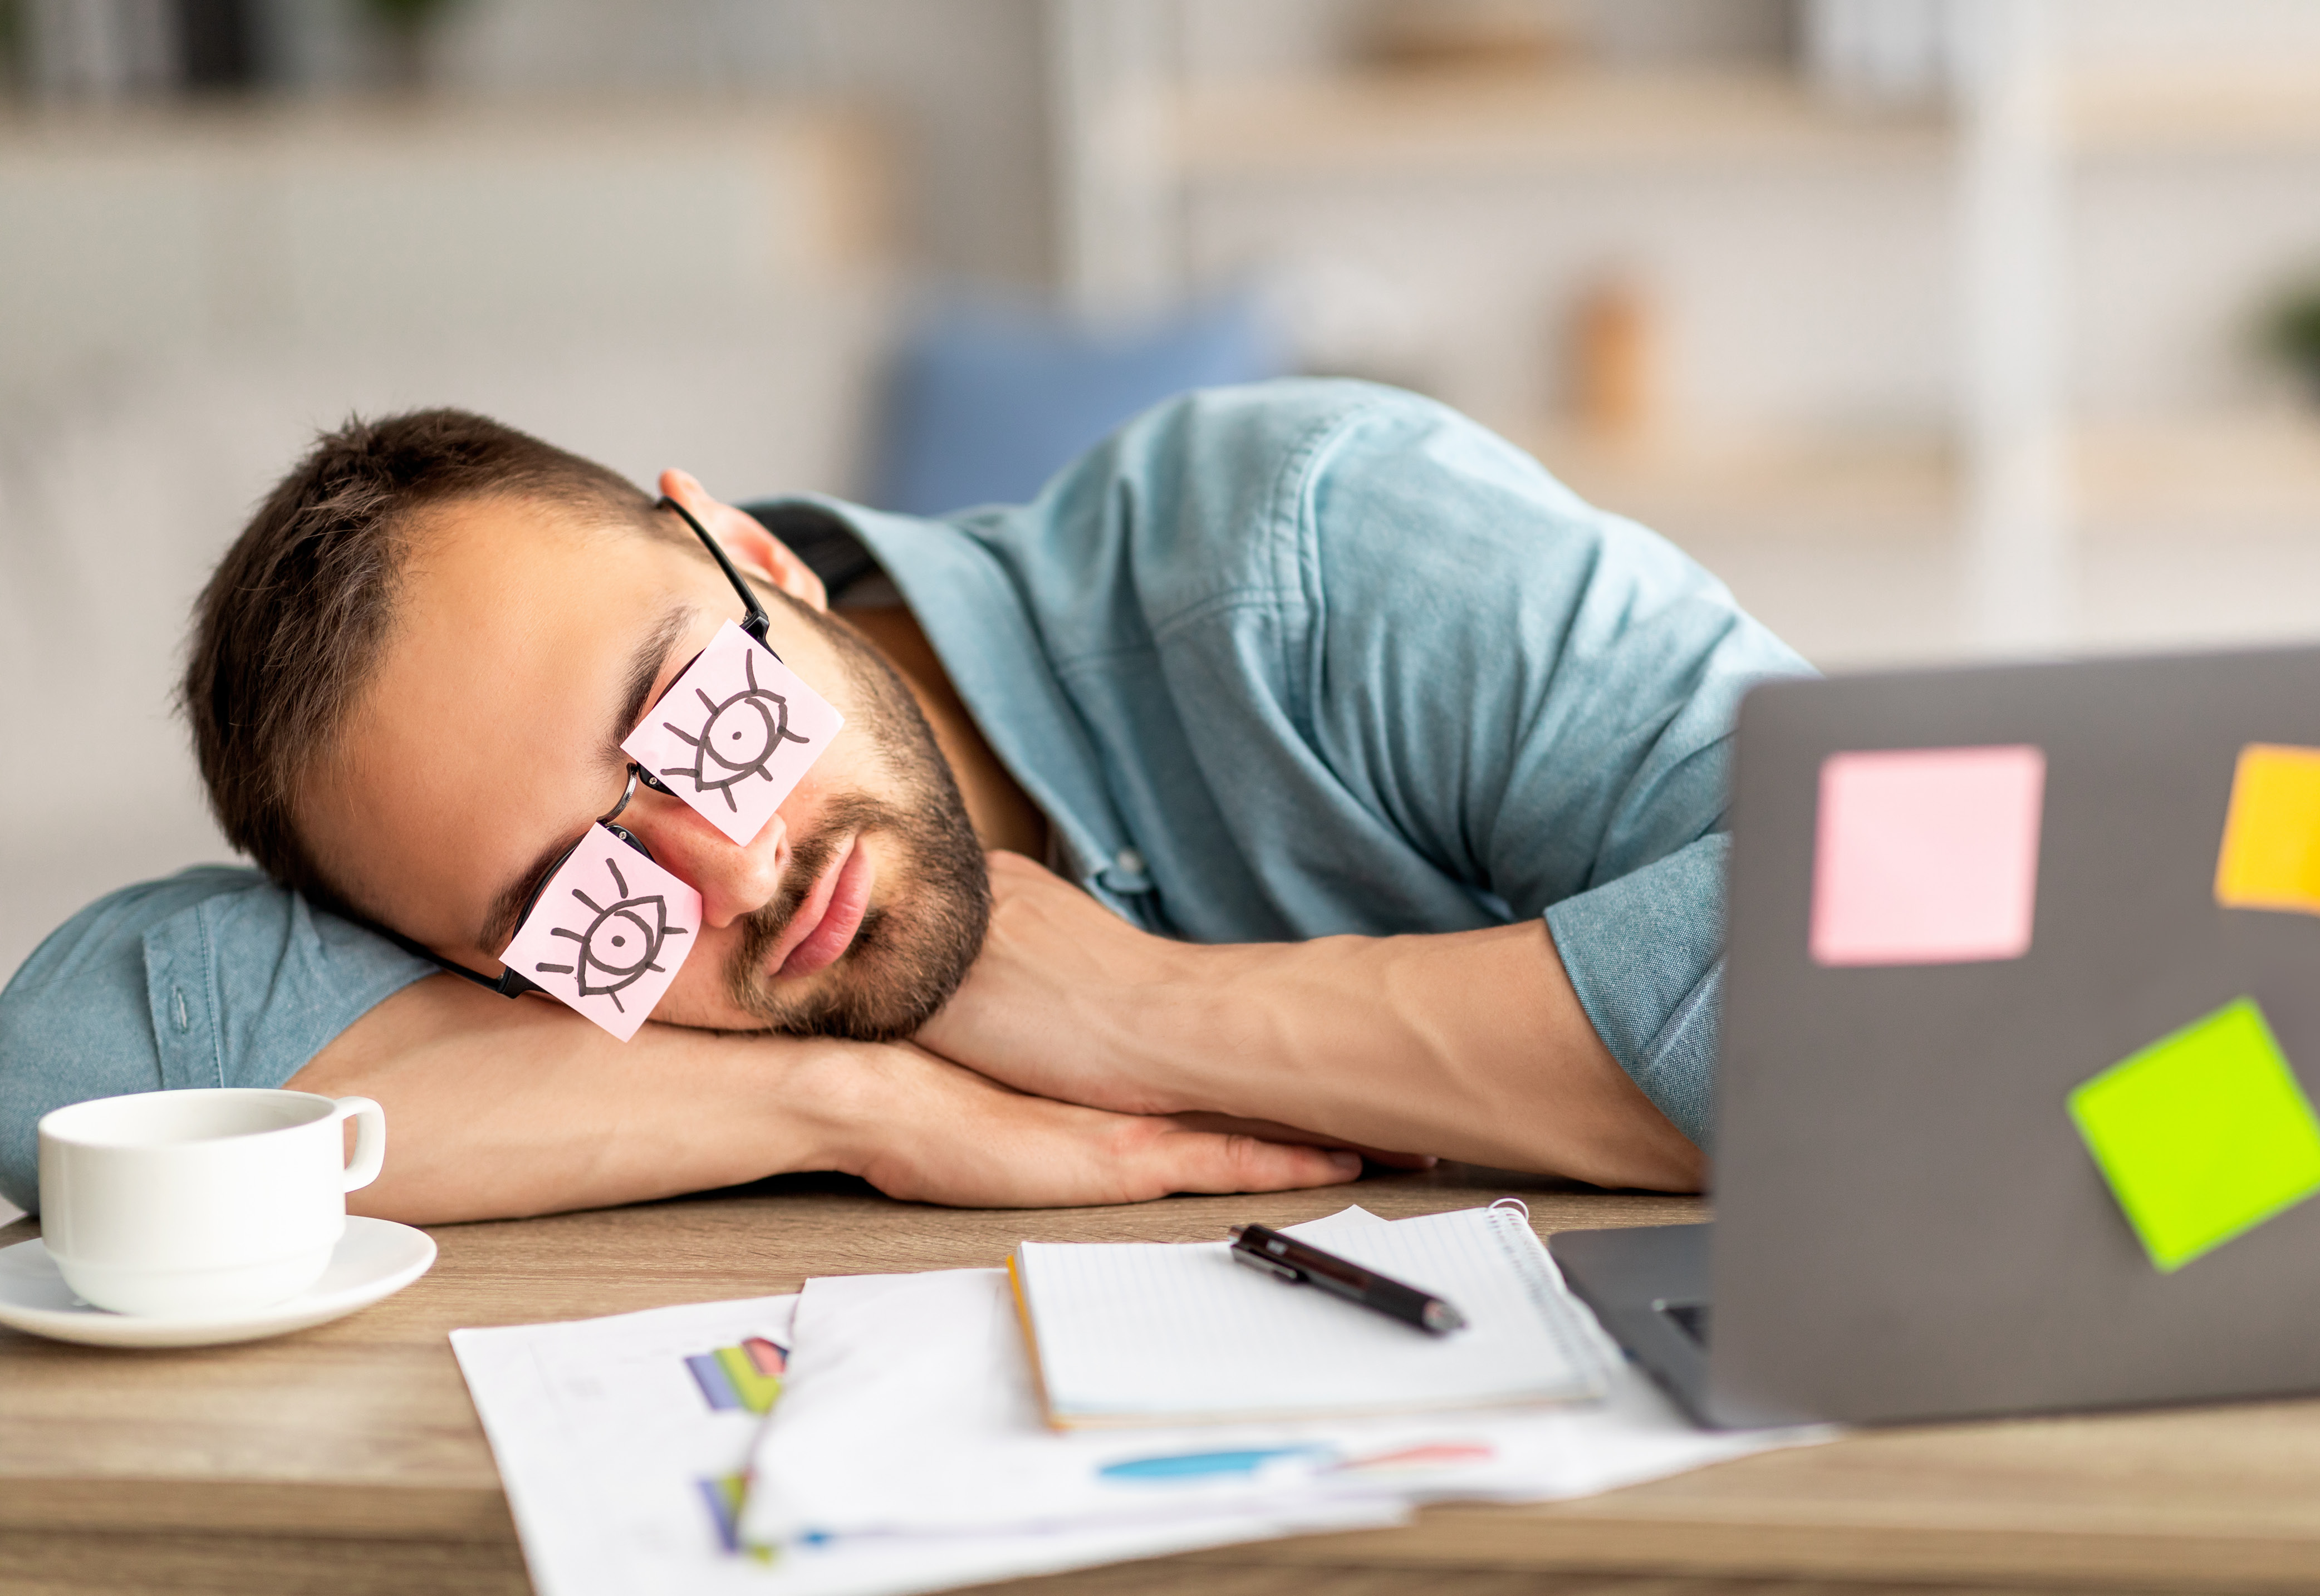 A man sleeping at his desk with eyes drawn on sticky notes on his glasses